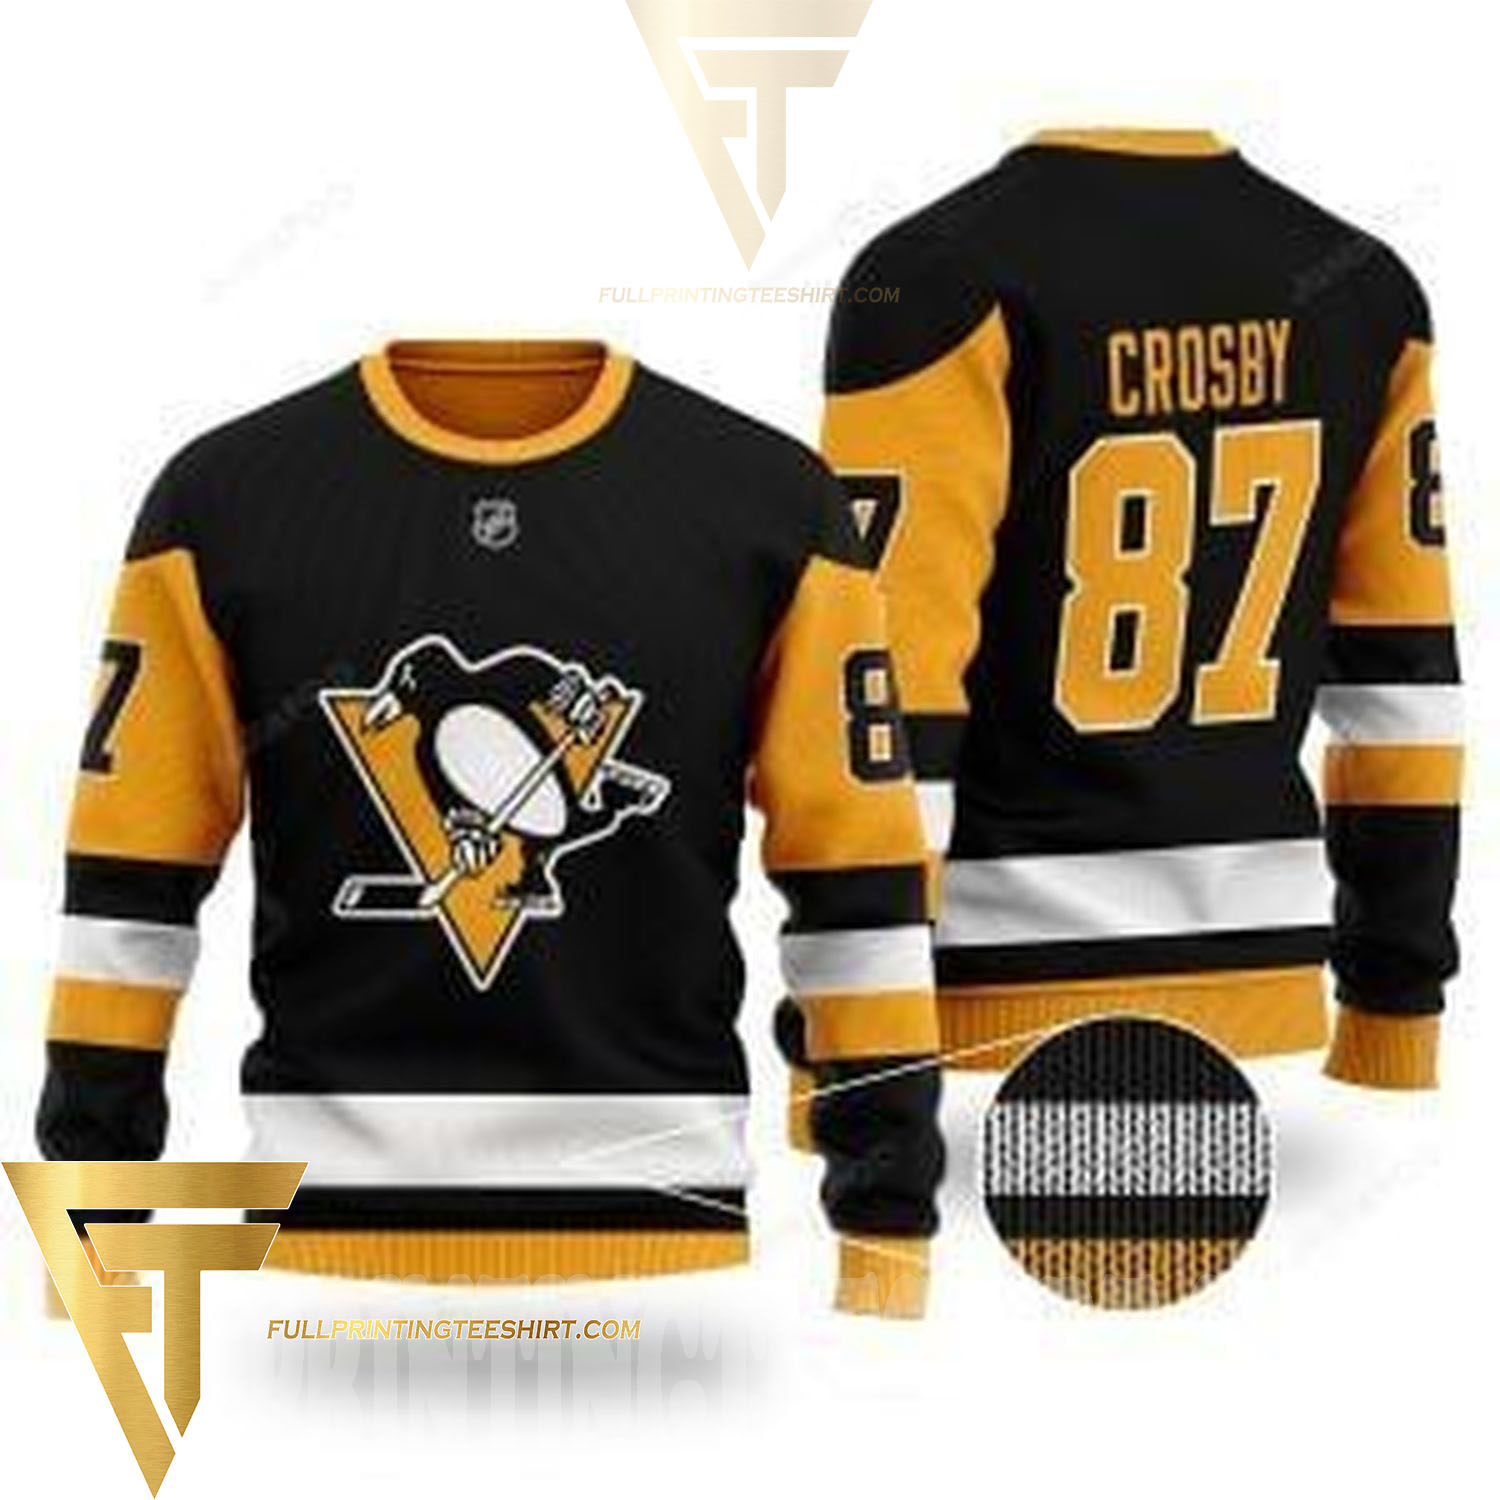 Sidney Crosby Pittsburgh Penguins Youth NHL Black Replica Hockey Jersey